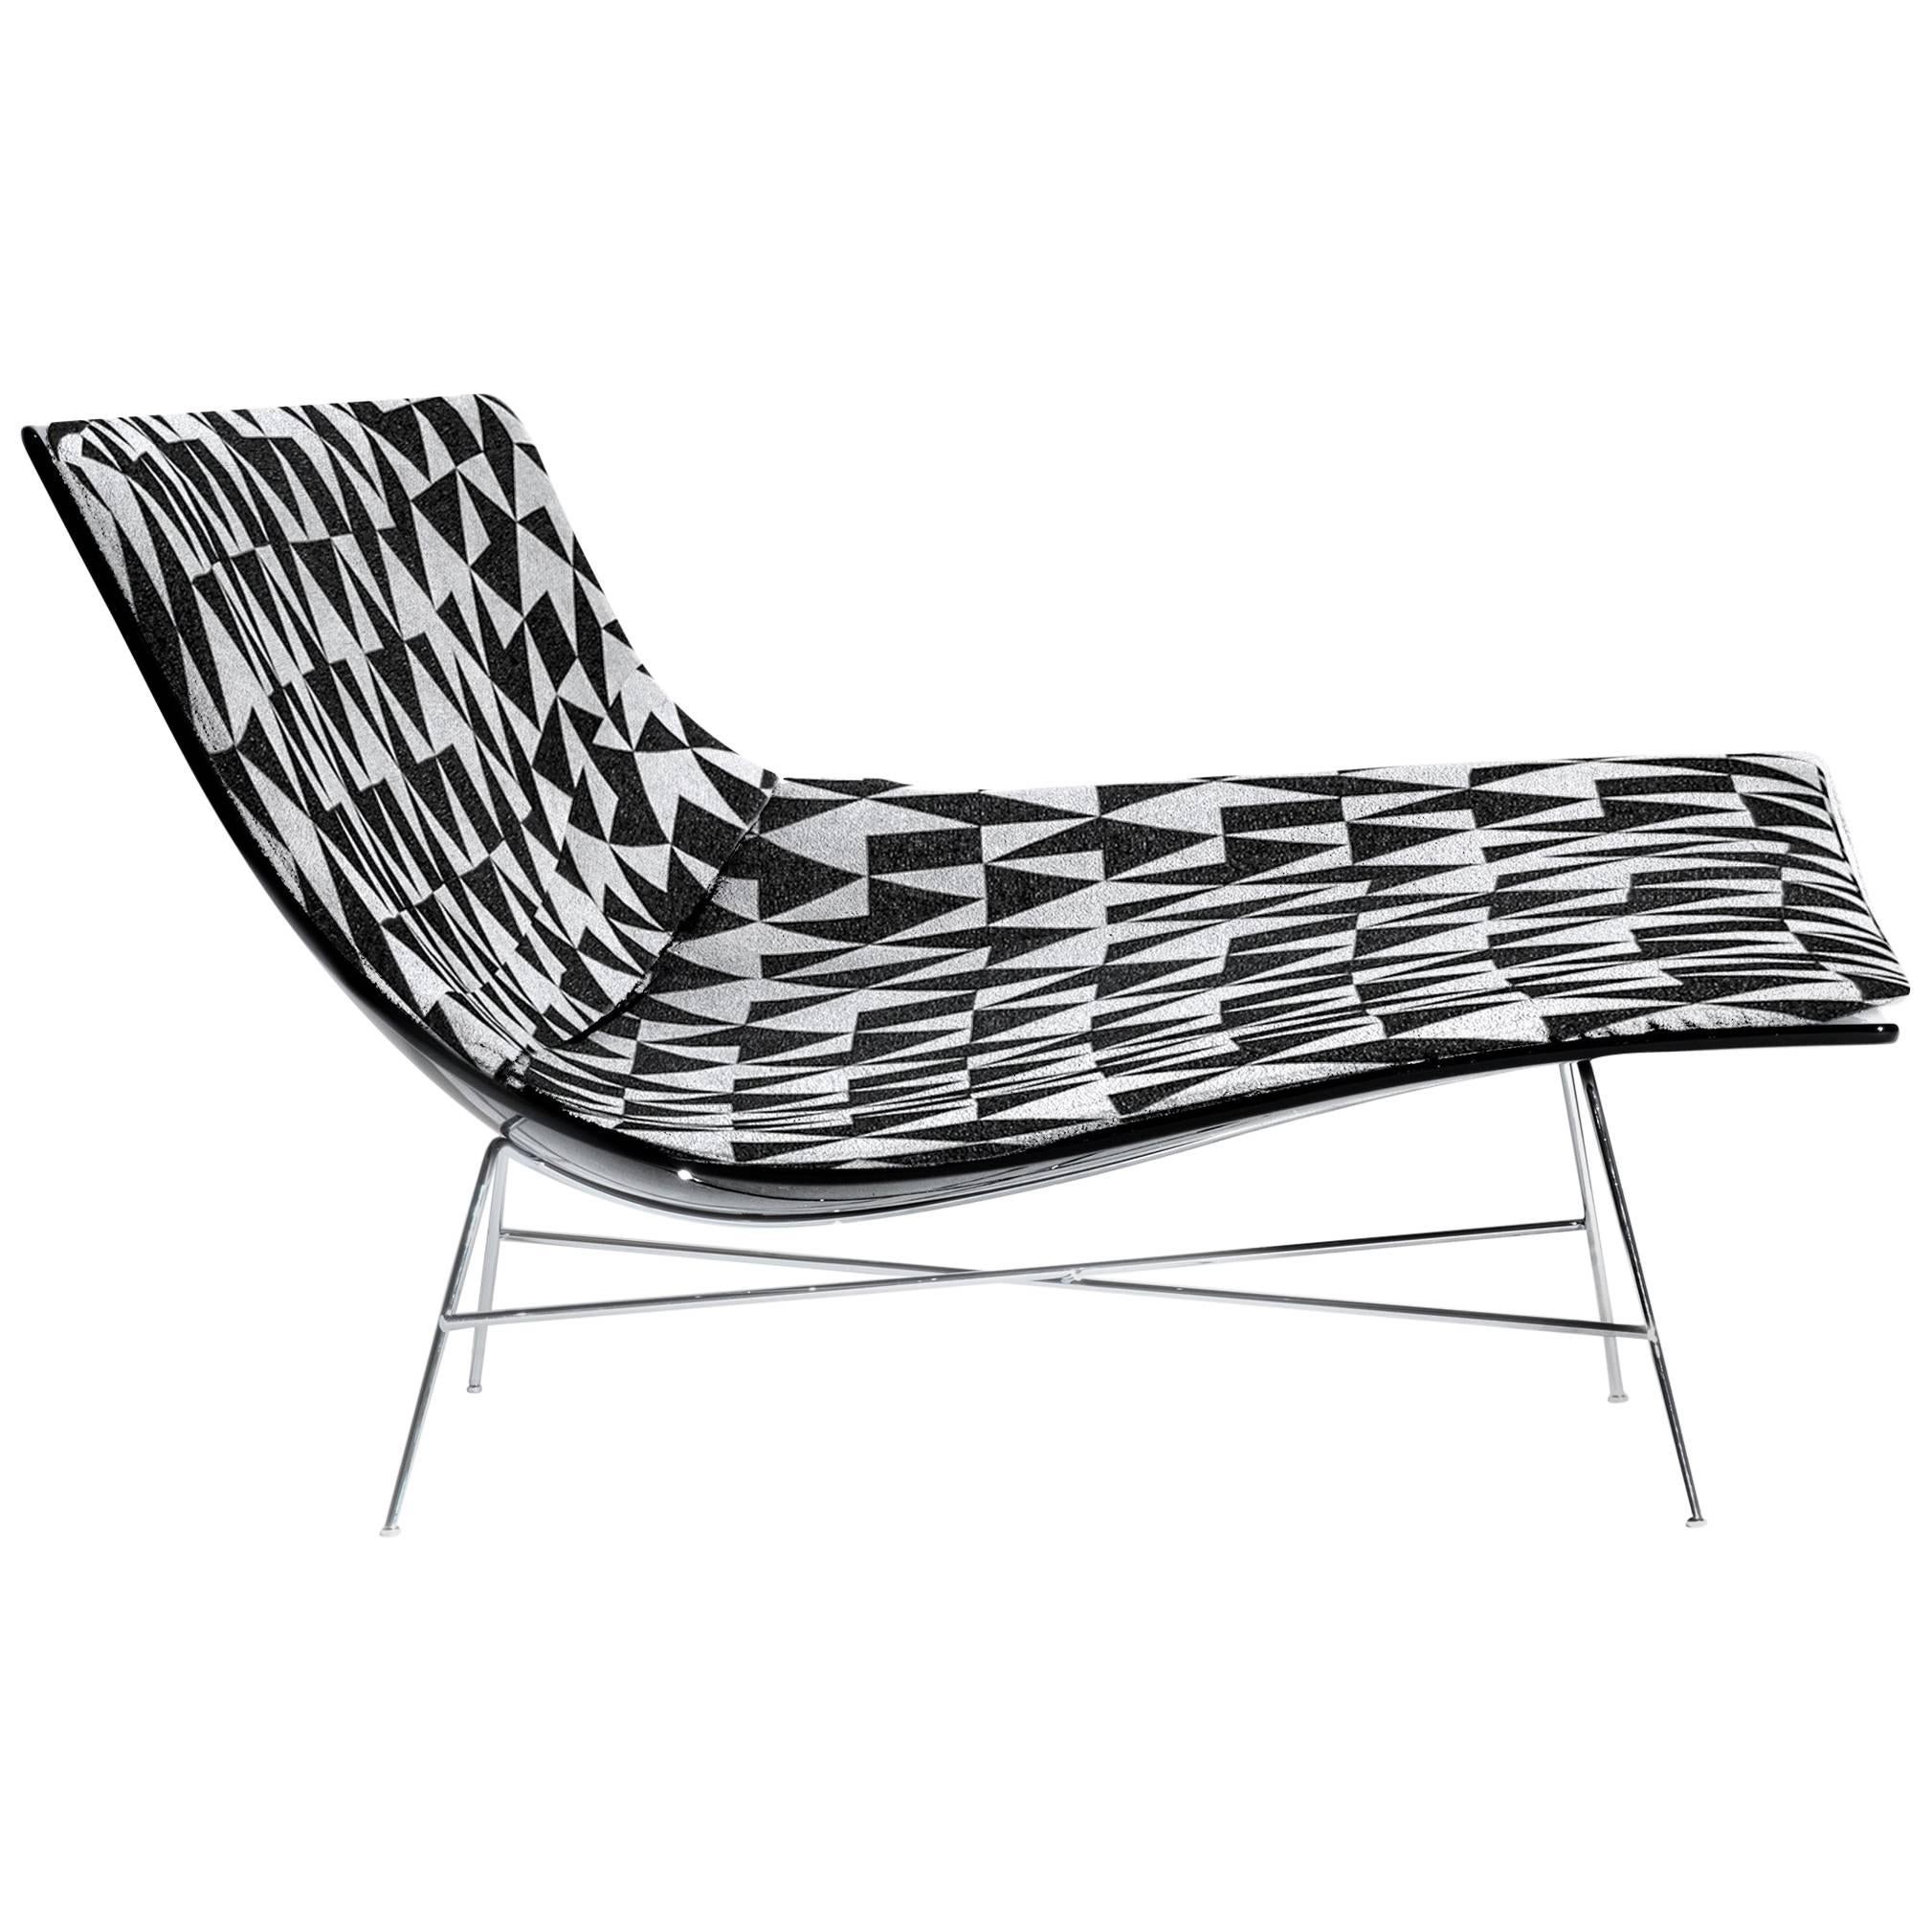 Patterned Full Moon Chair with Black Lacquered Shell, Ludovica & Roberto Palomba For Sale